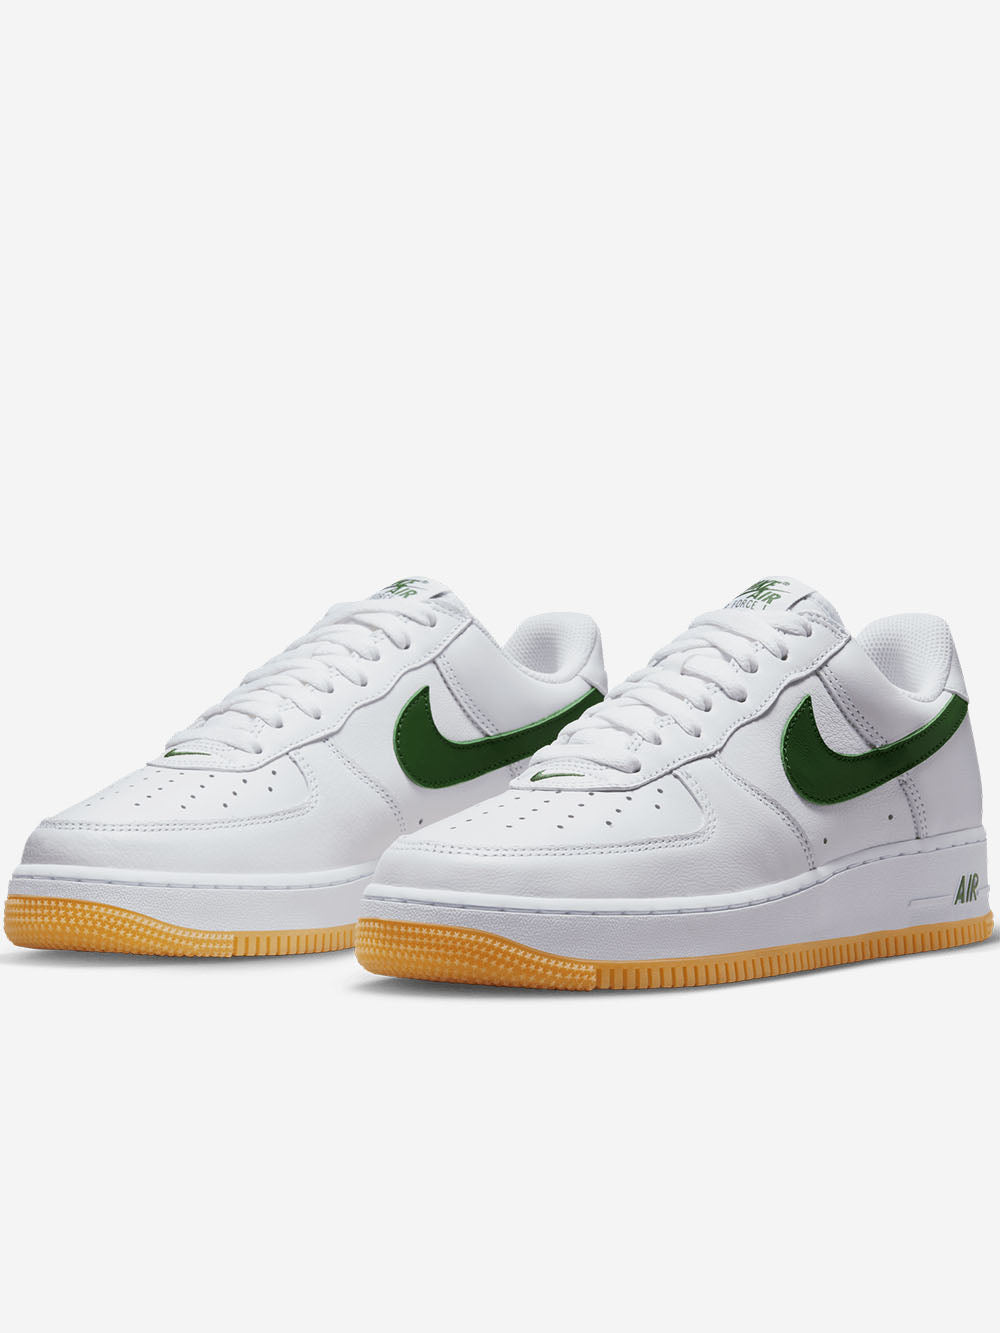 NIKE Air Force 1 Low Retro "Color of the month Forest Green" Sneakers Verde Urbanstaroma